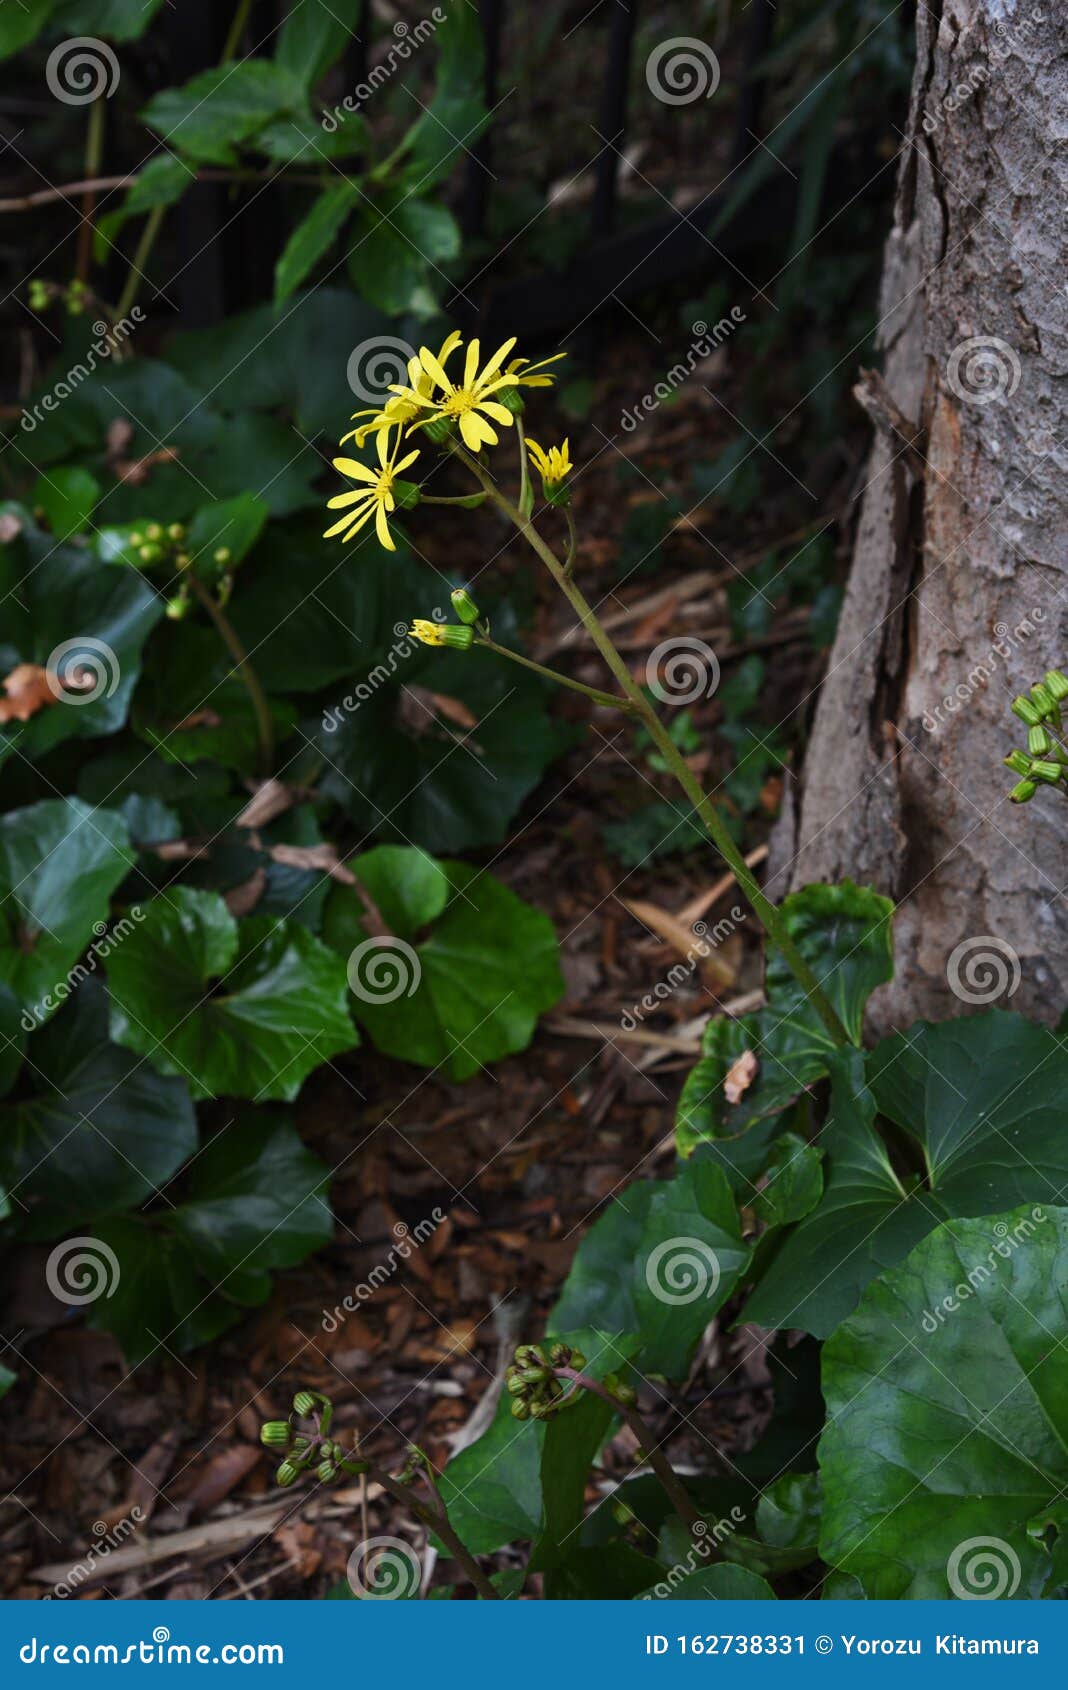 Japanese Silver Leaf Flowers Stock Image Image Of Meadow Flower